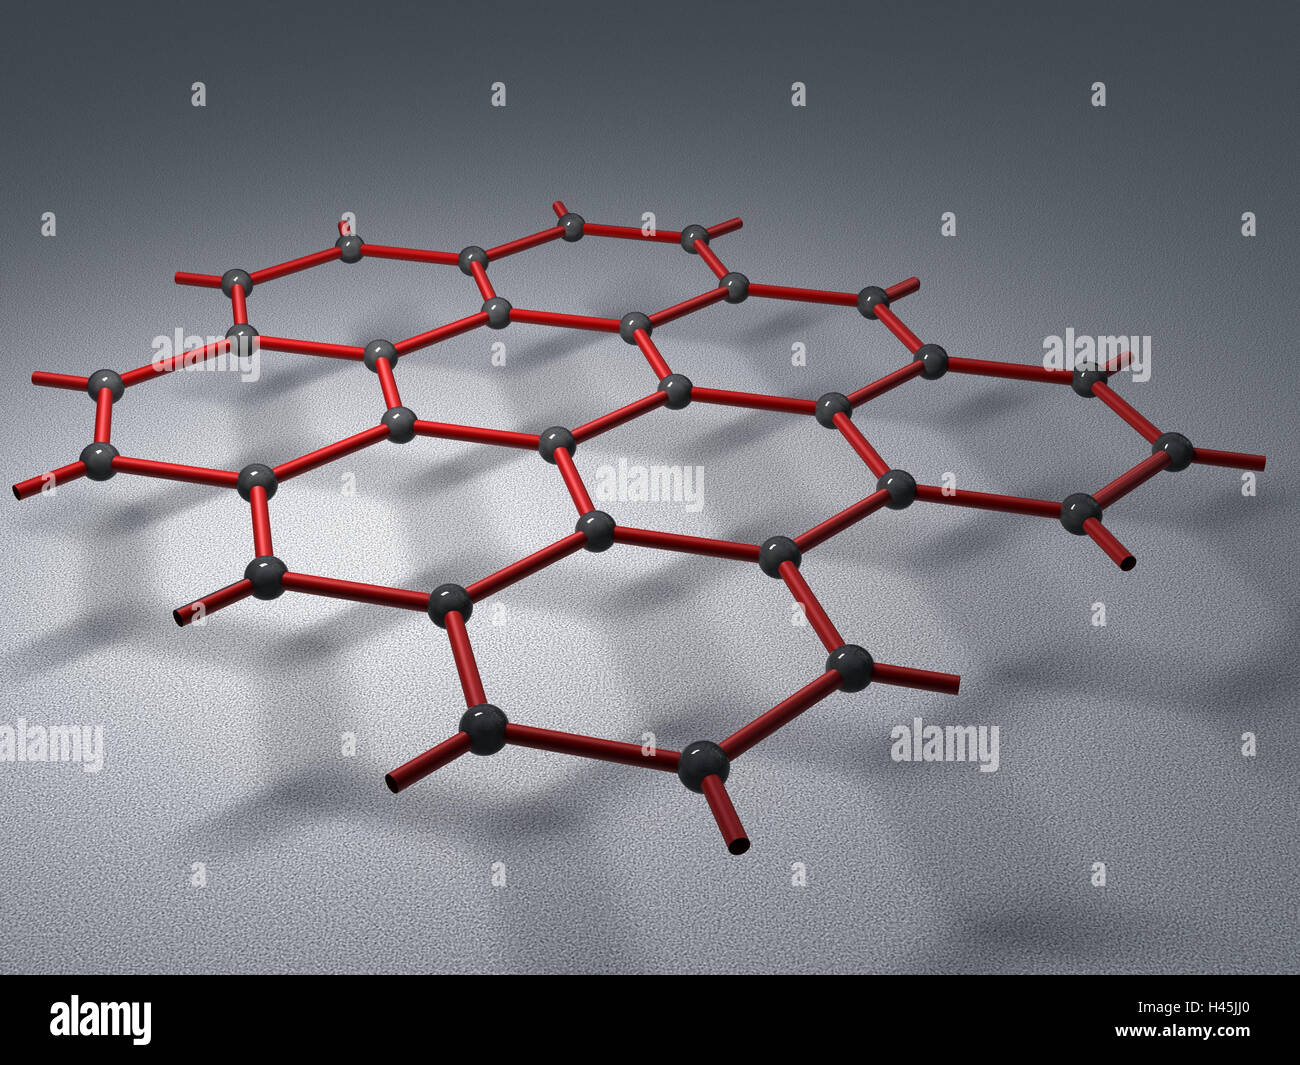 Nuclear grid the Graphens, of a position carbon atoms, semiconductor industry, industry, economy, prefabricated part, graphs, Graphene, modification, carbon, honeycomb-like, sample, nuclear grid, graphite, physics, Nobel prize, graph, carbon, atom, atoms, Stock Photo